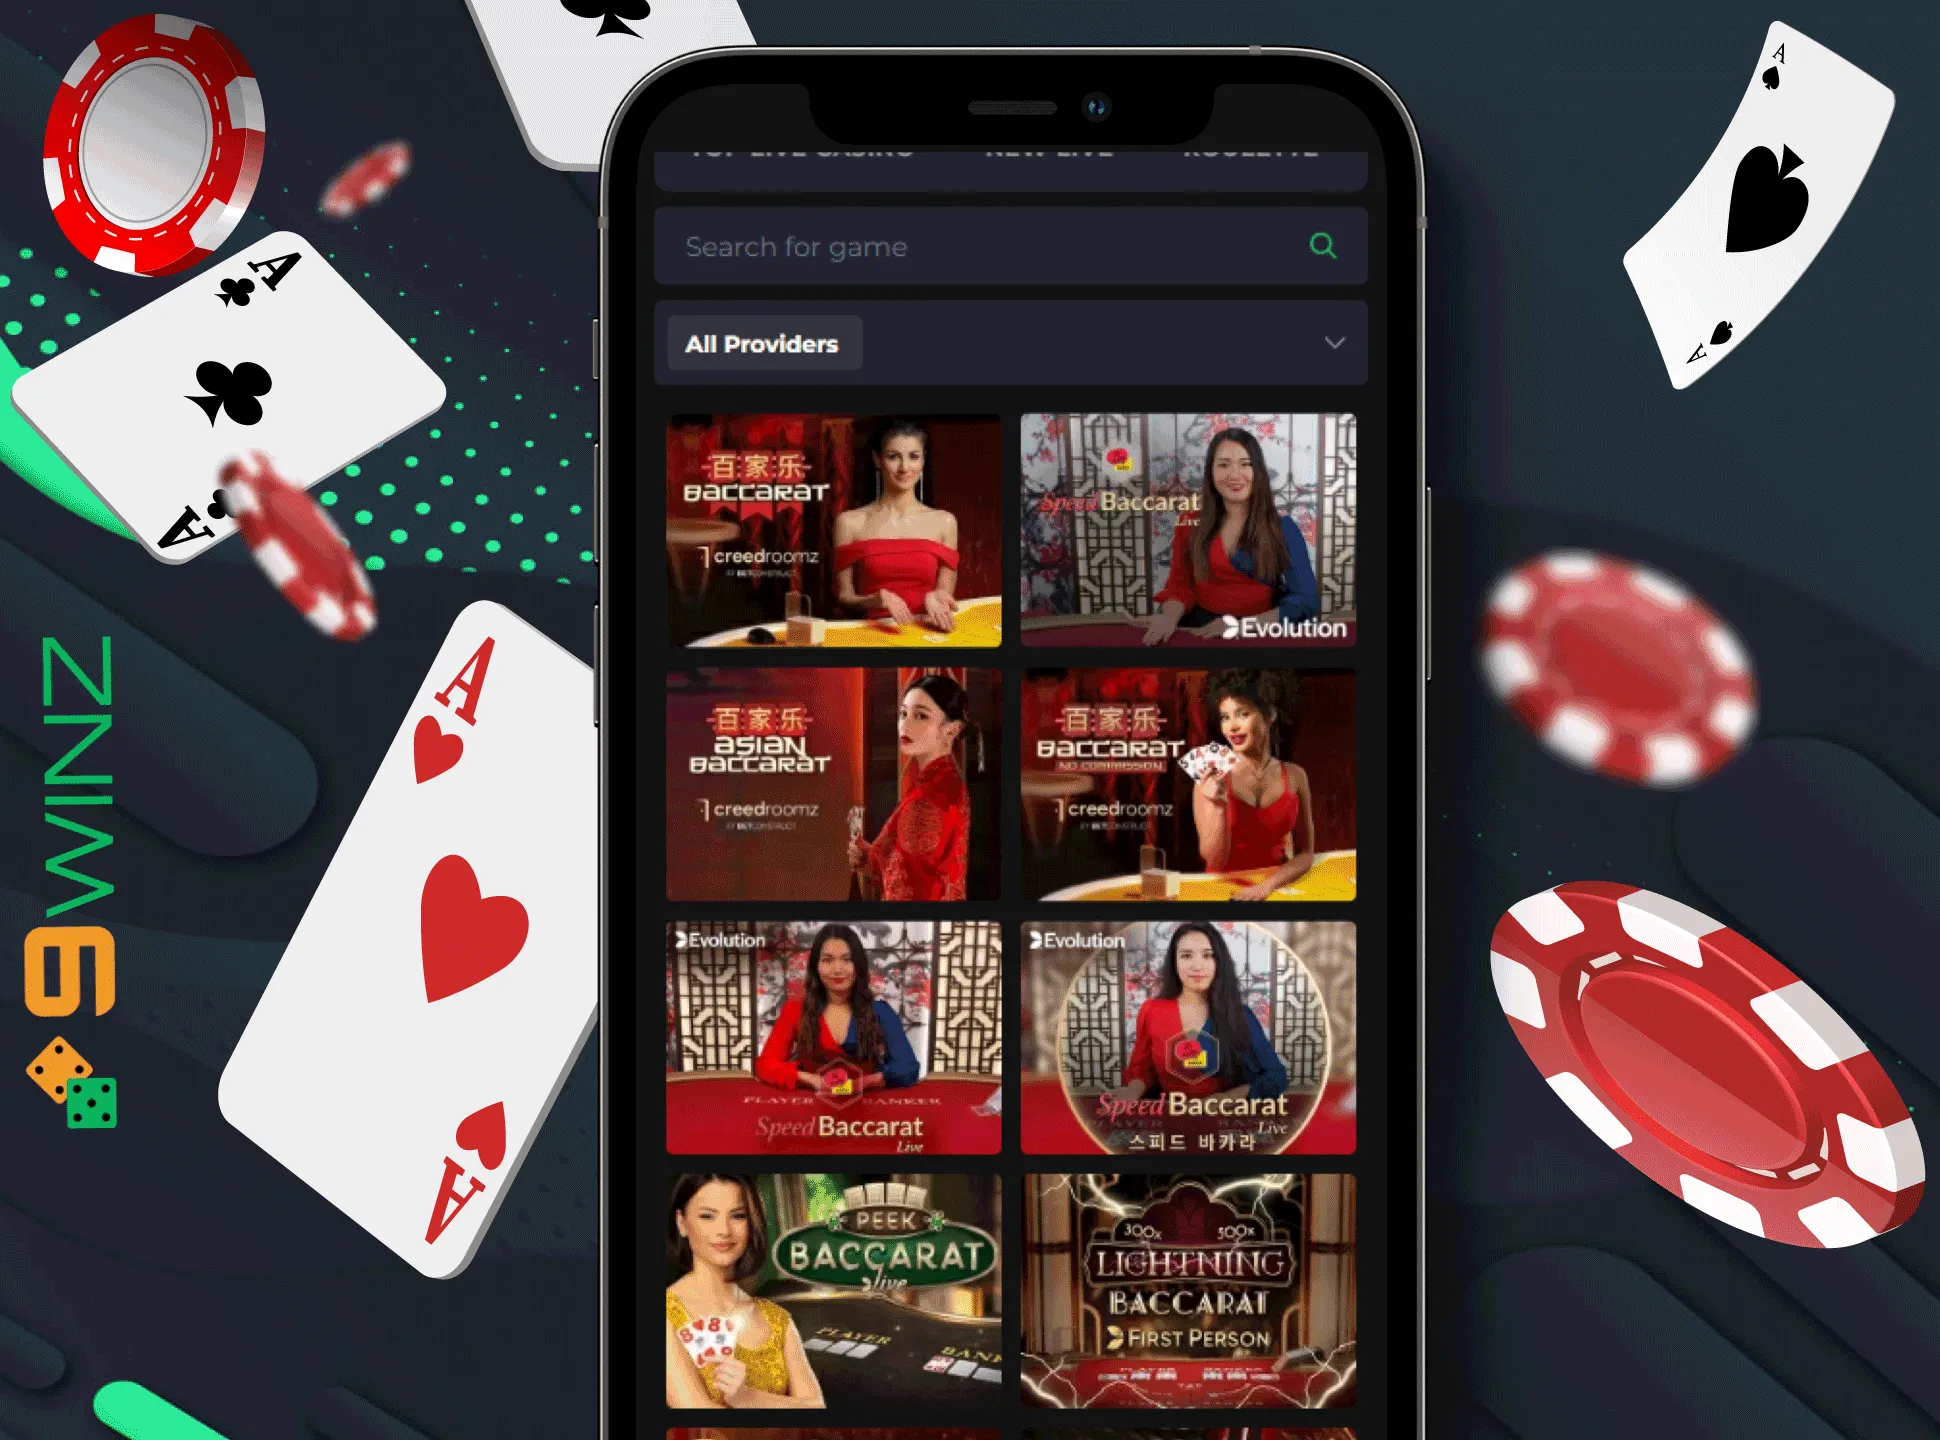 Use the 9winz baccarat app for playing baccarat games.